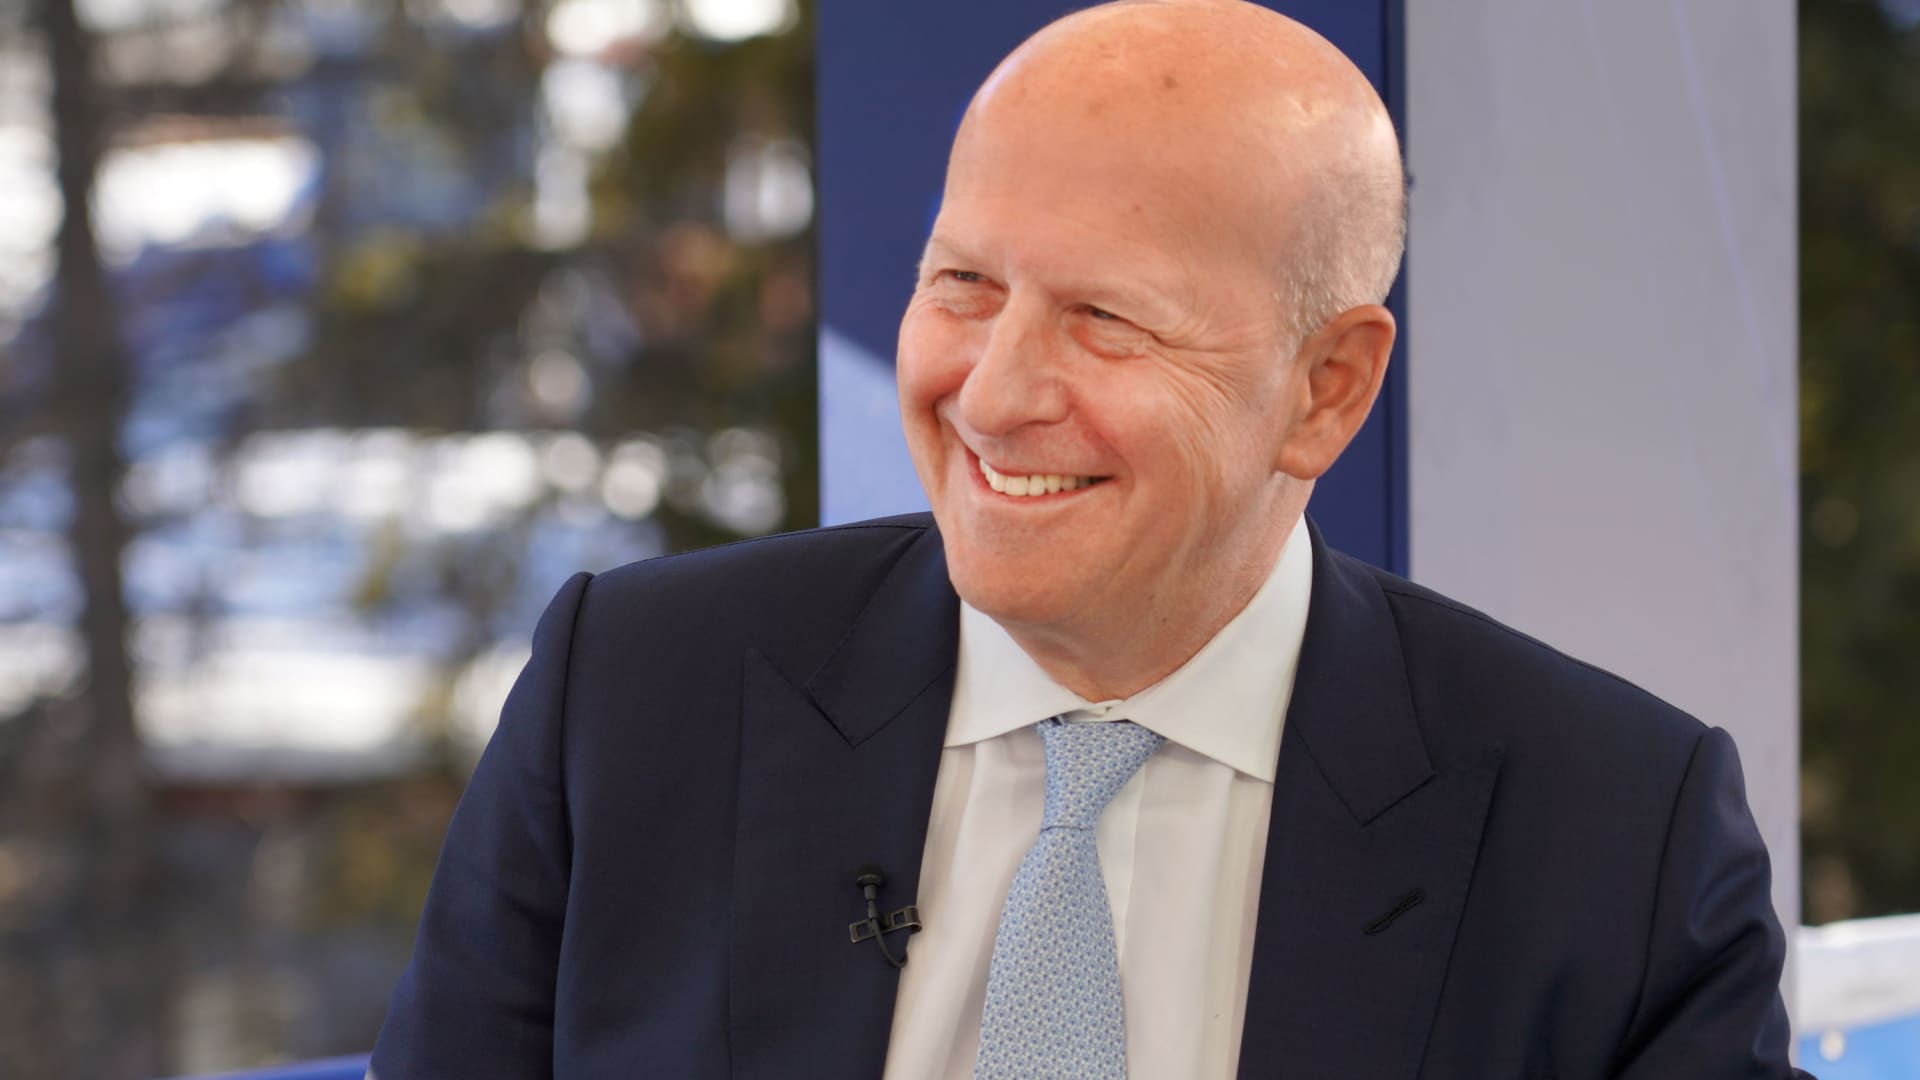 Goldman Sachs gives senior managers a new perk: ‘Flexible vacation’ policy